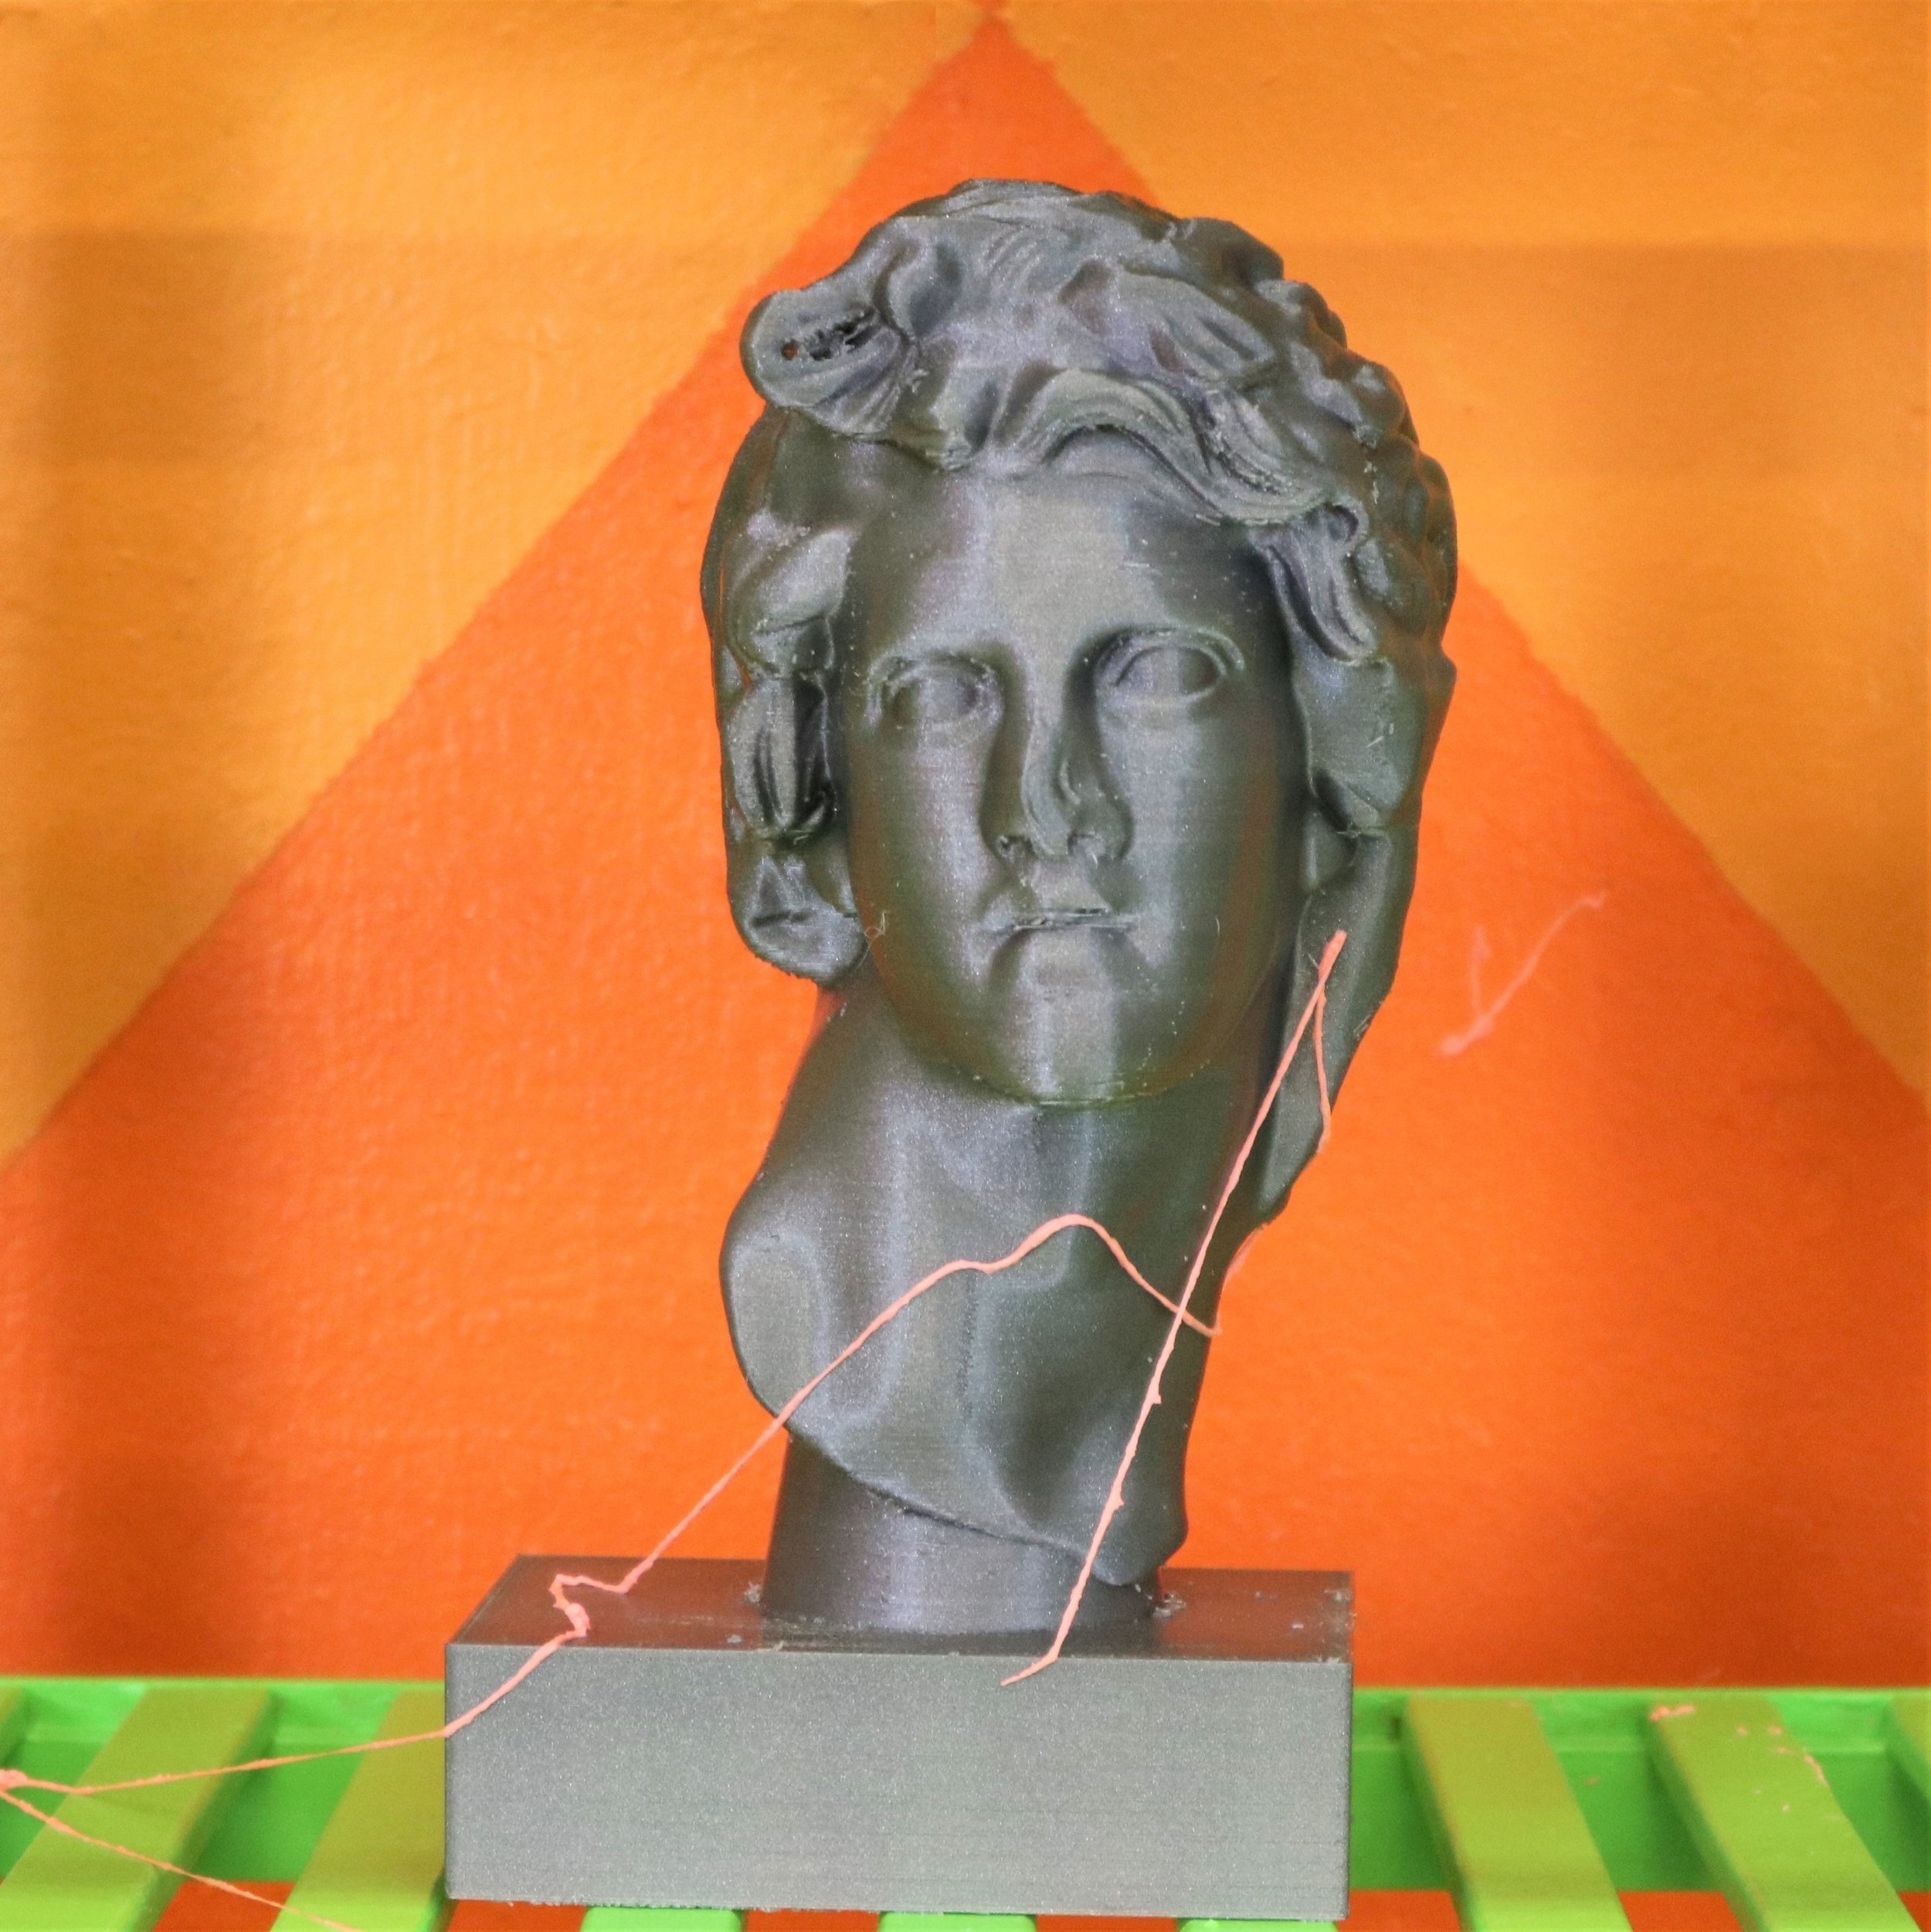  Vaporwave_Floral_Shoppe_Bust _of_Helios  2018  polylactic acid 3D print   3D print made secretly in military contractor’s printing lab using model design purchased online 